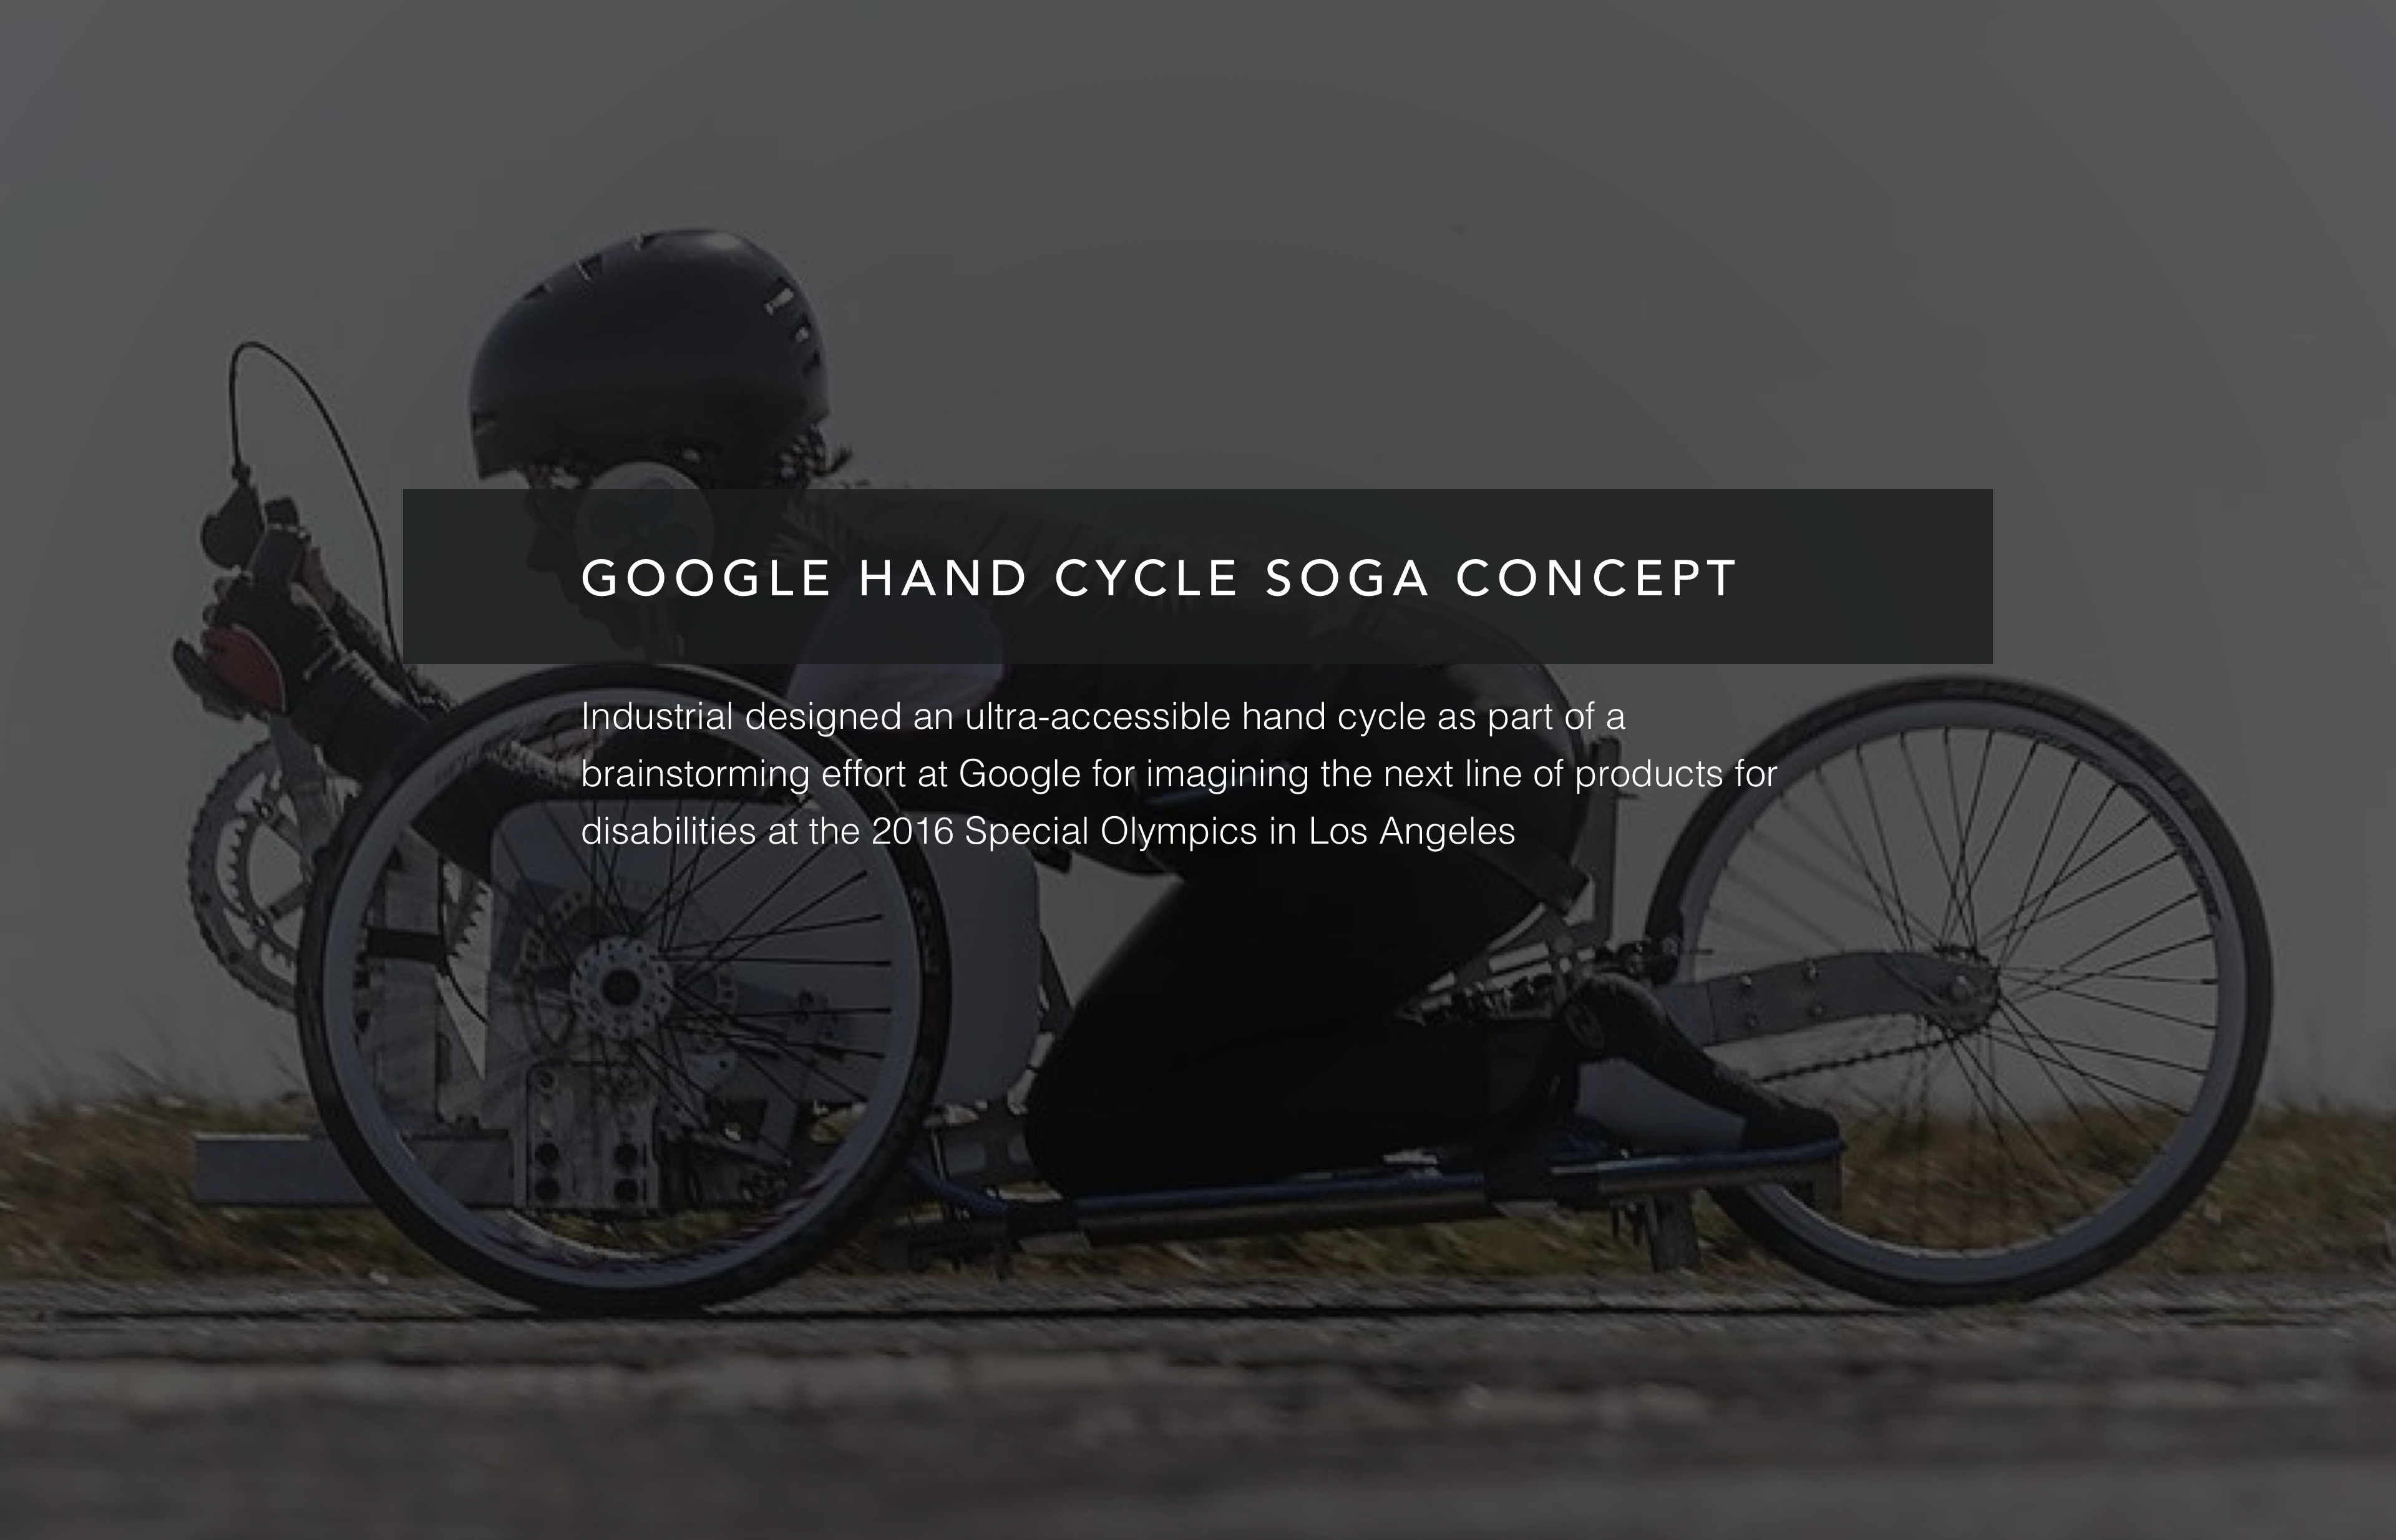 Google Hand Cycle Concept